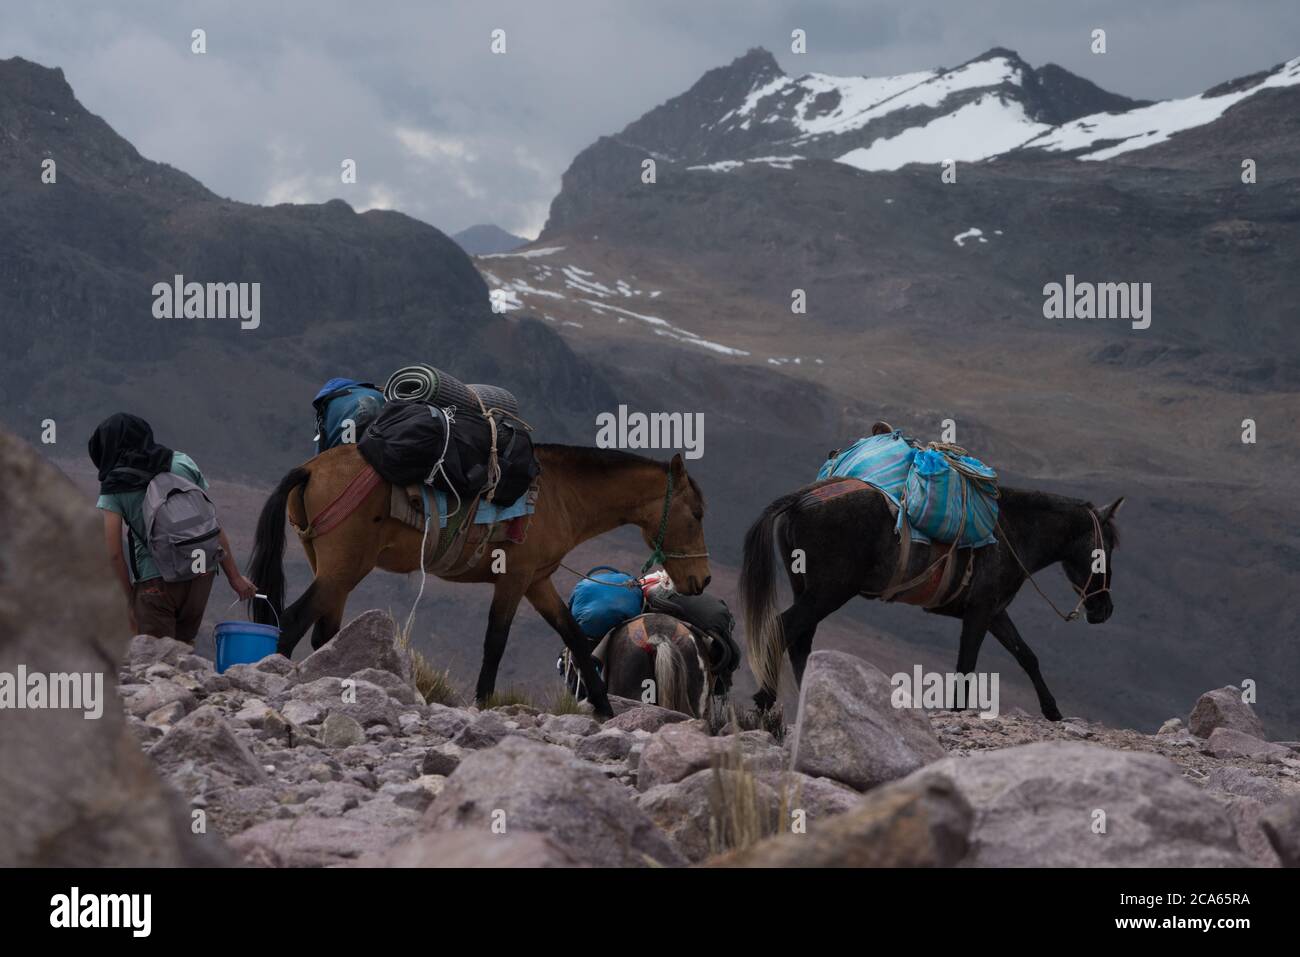 Packhorses are the only way to transport heavy loads across the Andean landscape in Peru where there are no roads. Stock Photo